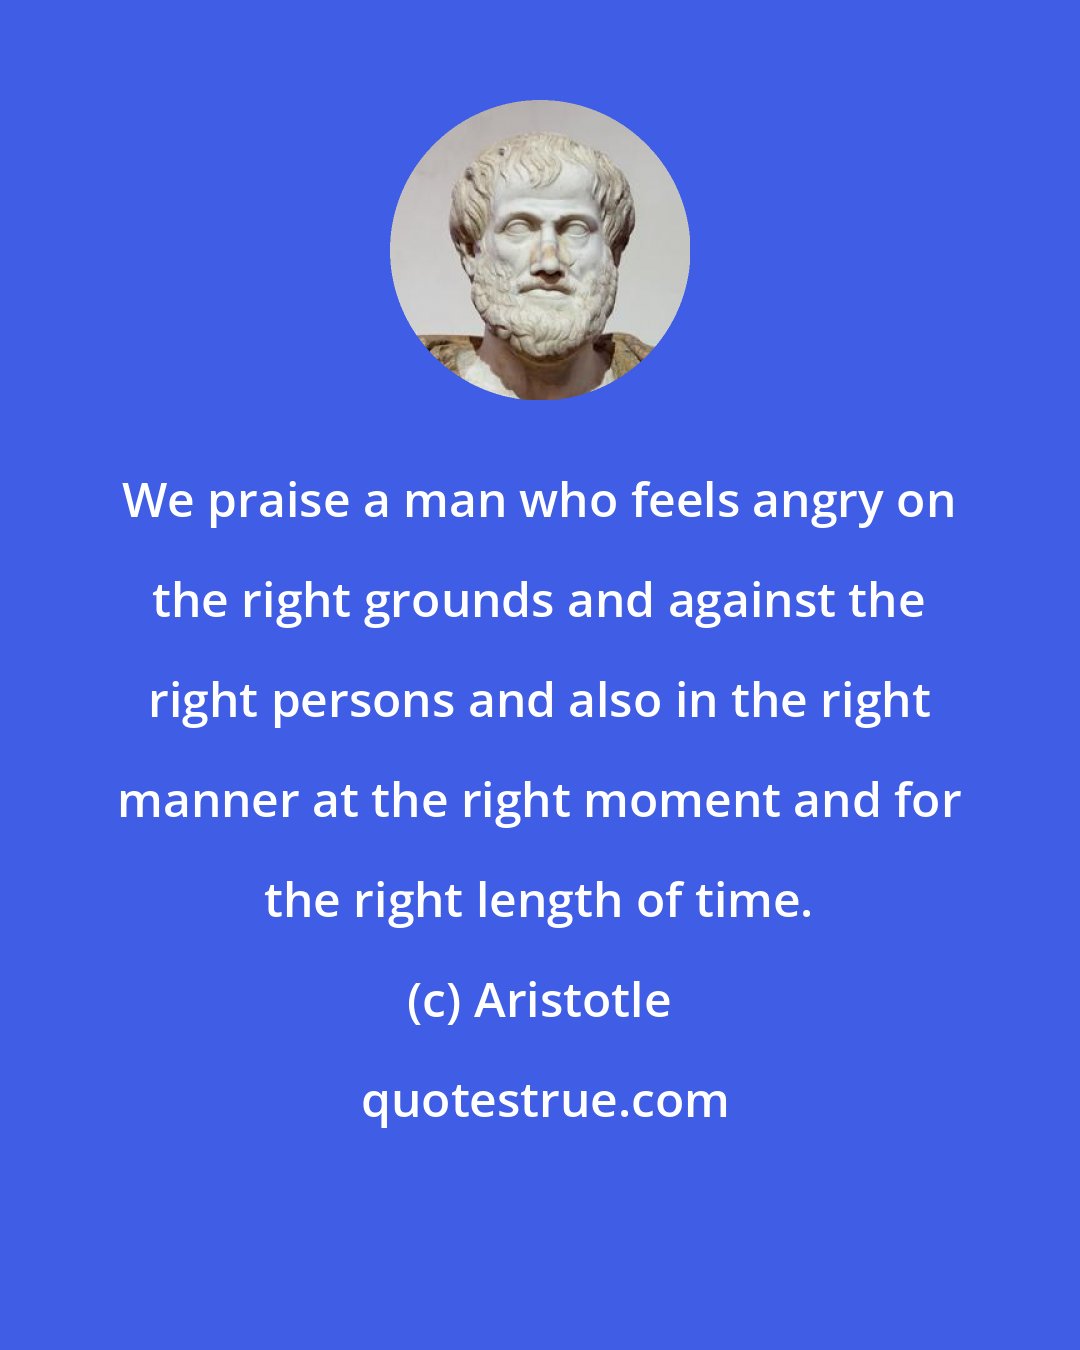 Aristotle: We praise a man who feels angry on the right grounds and against the right persons and also in the right manner at the right moment and for the right length of time.